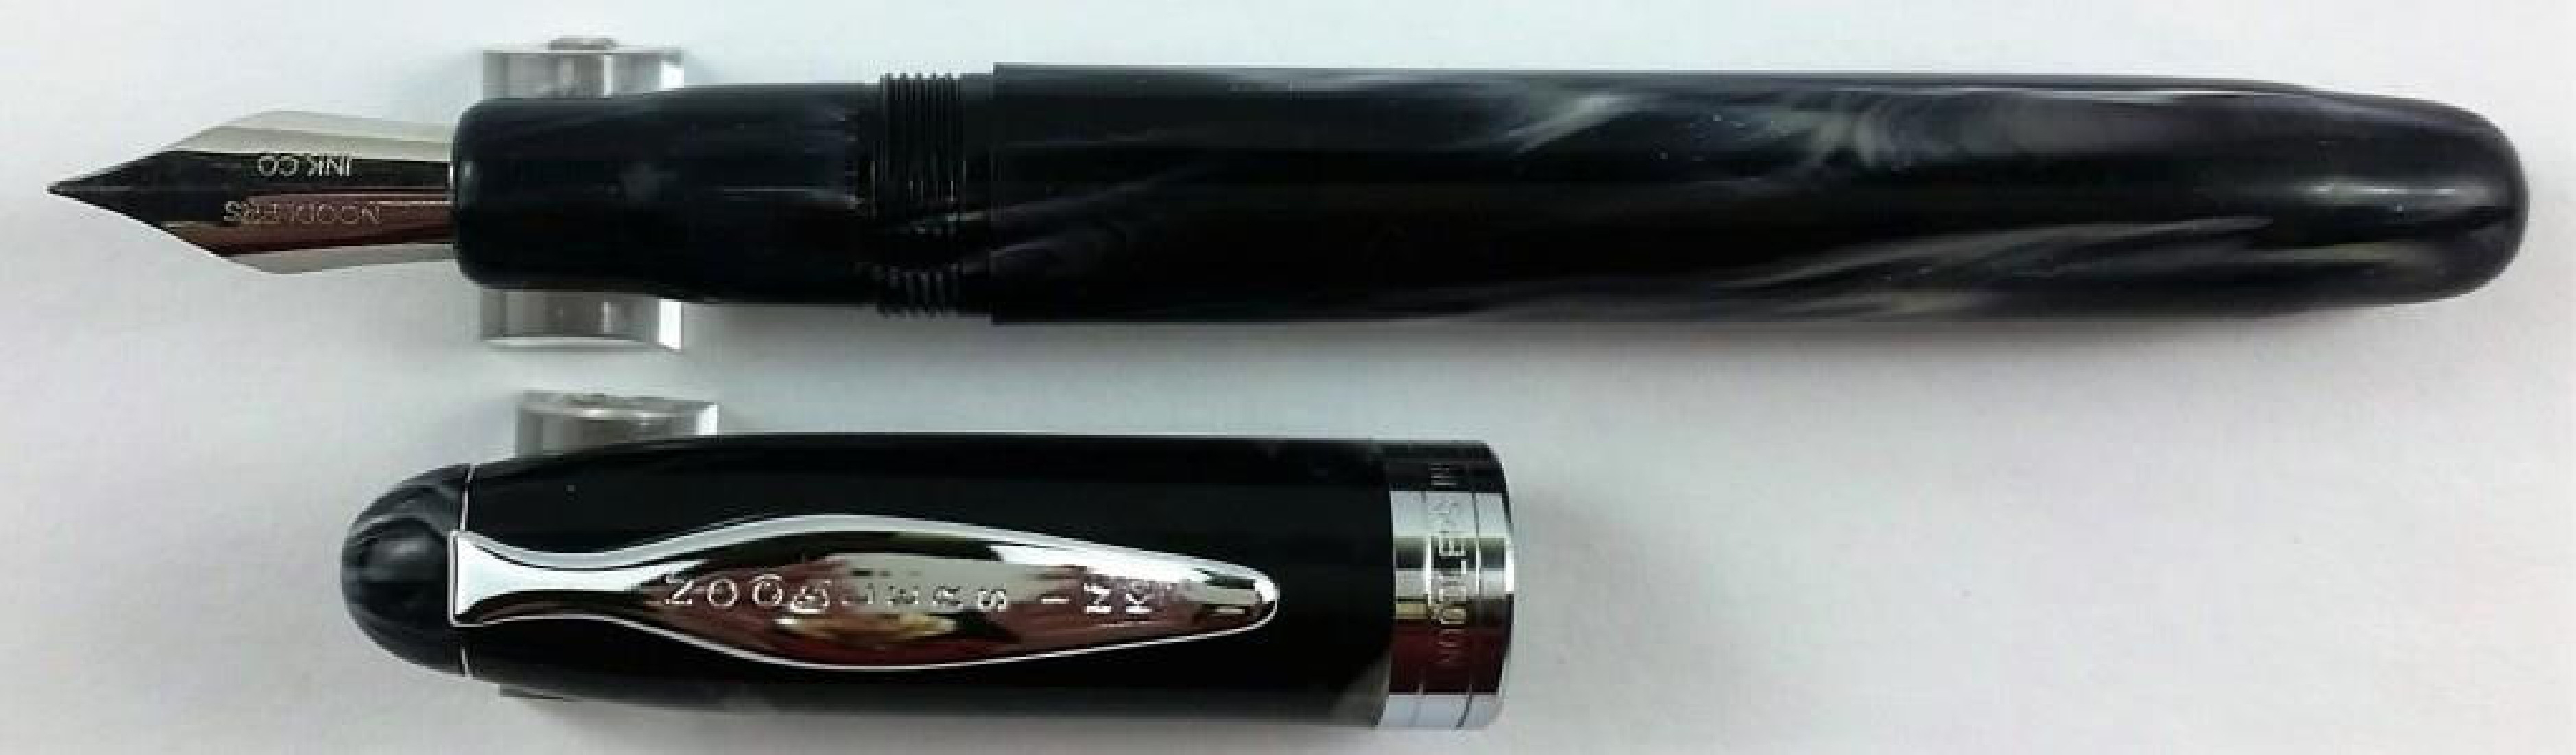 Noodlers Ivory Darkness Ahab Flex 15028  Fountain Pen